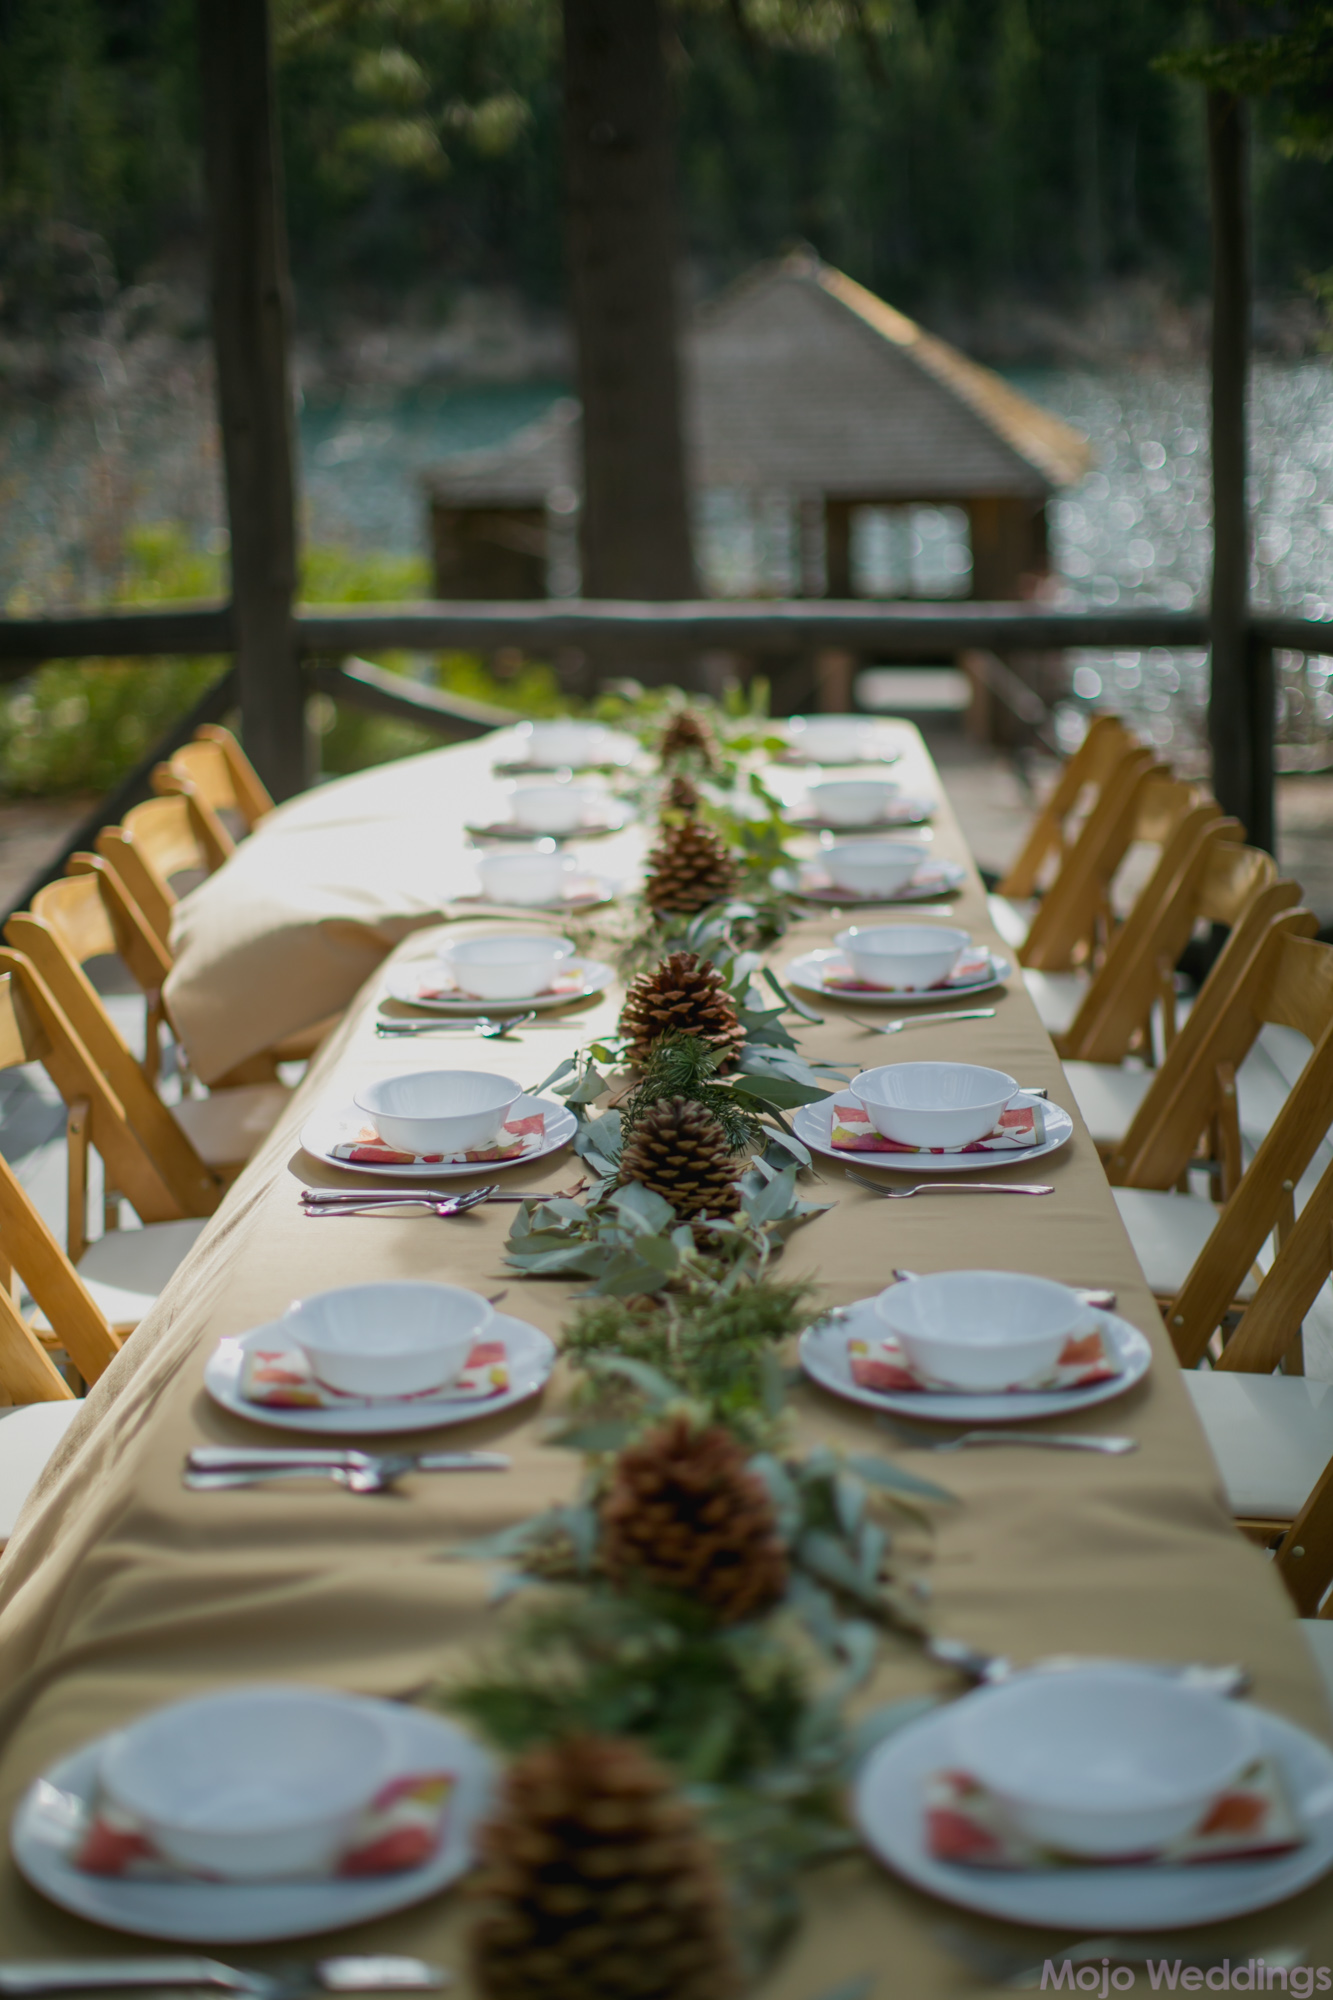 The table scape shows white bowls, napkins with fall colored leaves, and pine cone centerpieces.